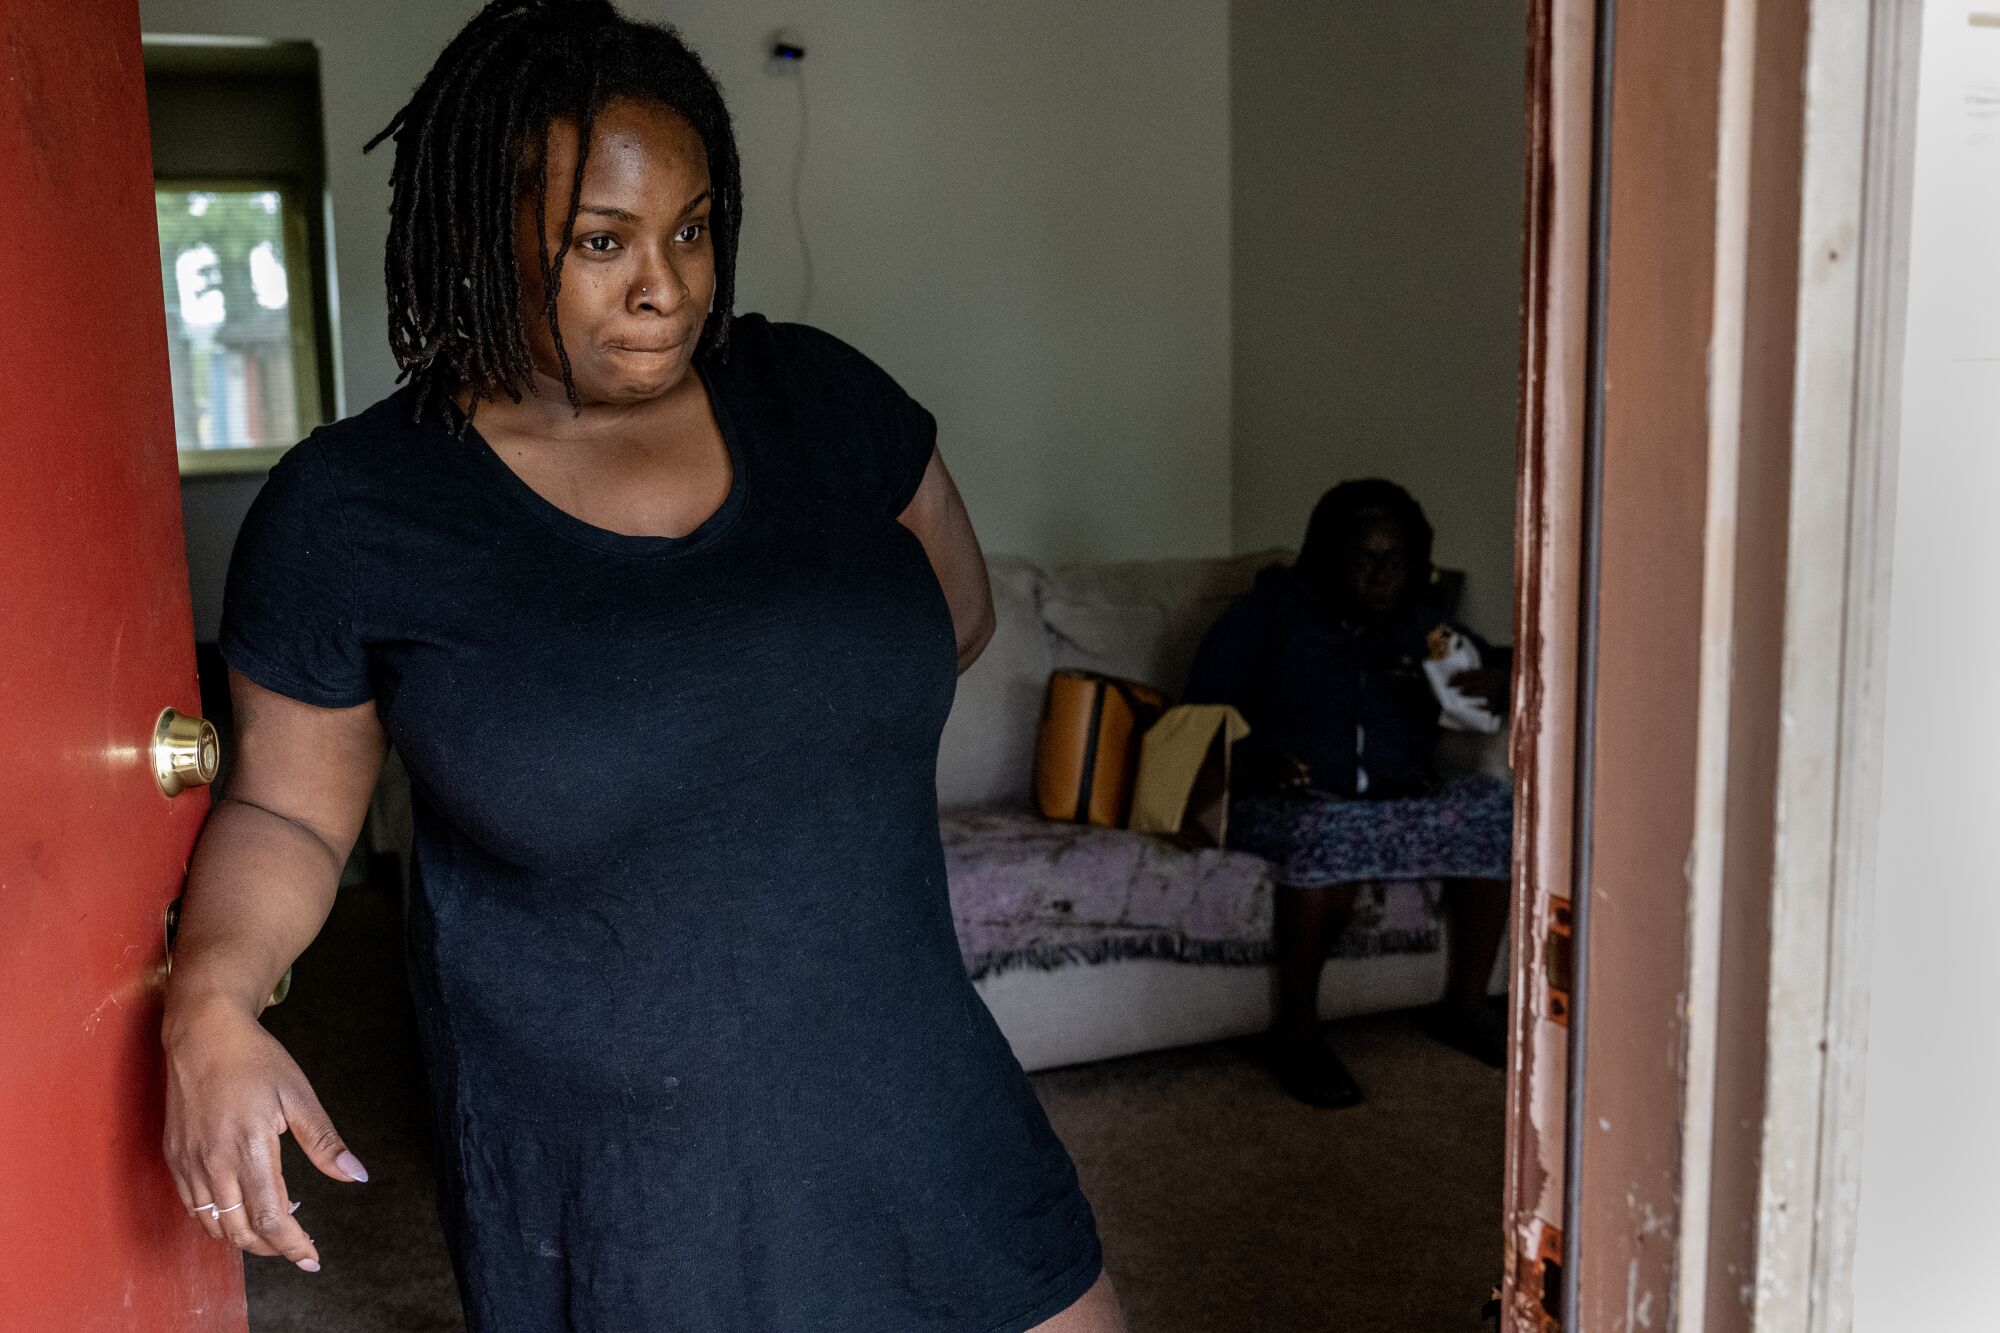 Tyeshia Smith, 31, stands in a doorway.